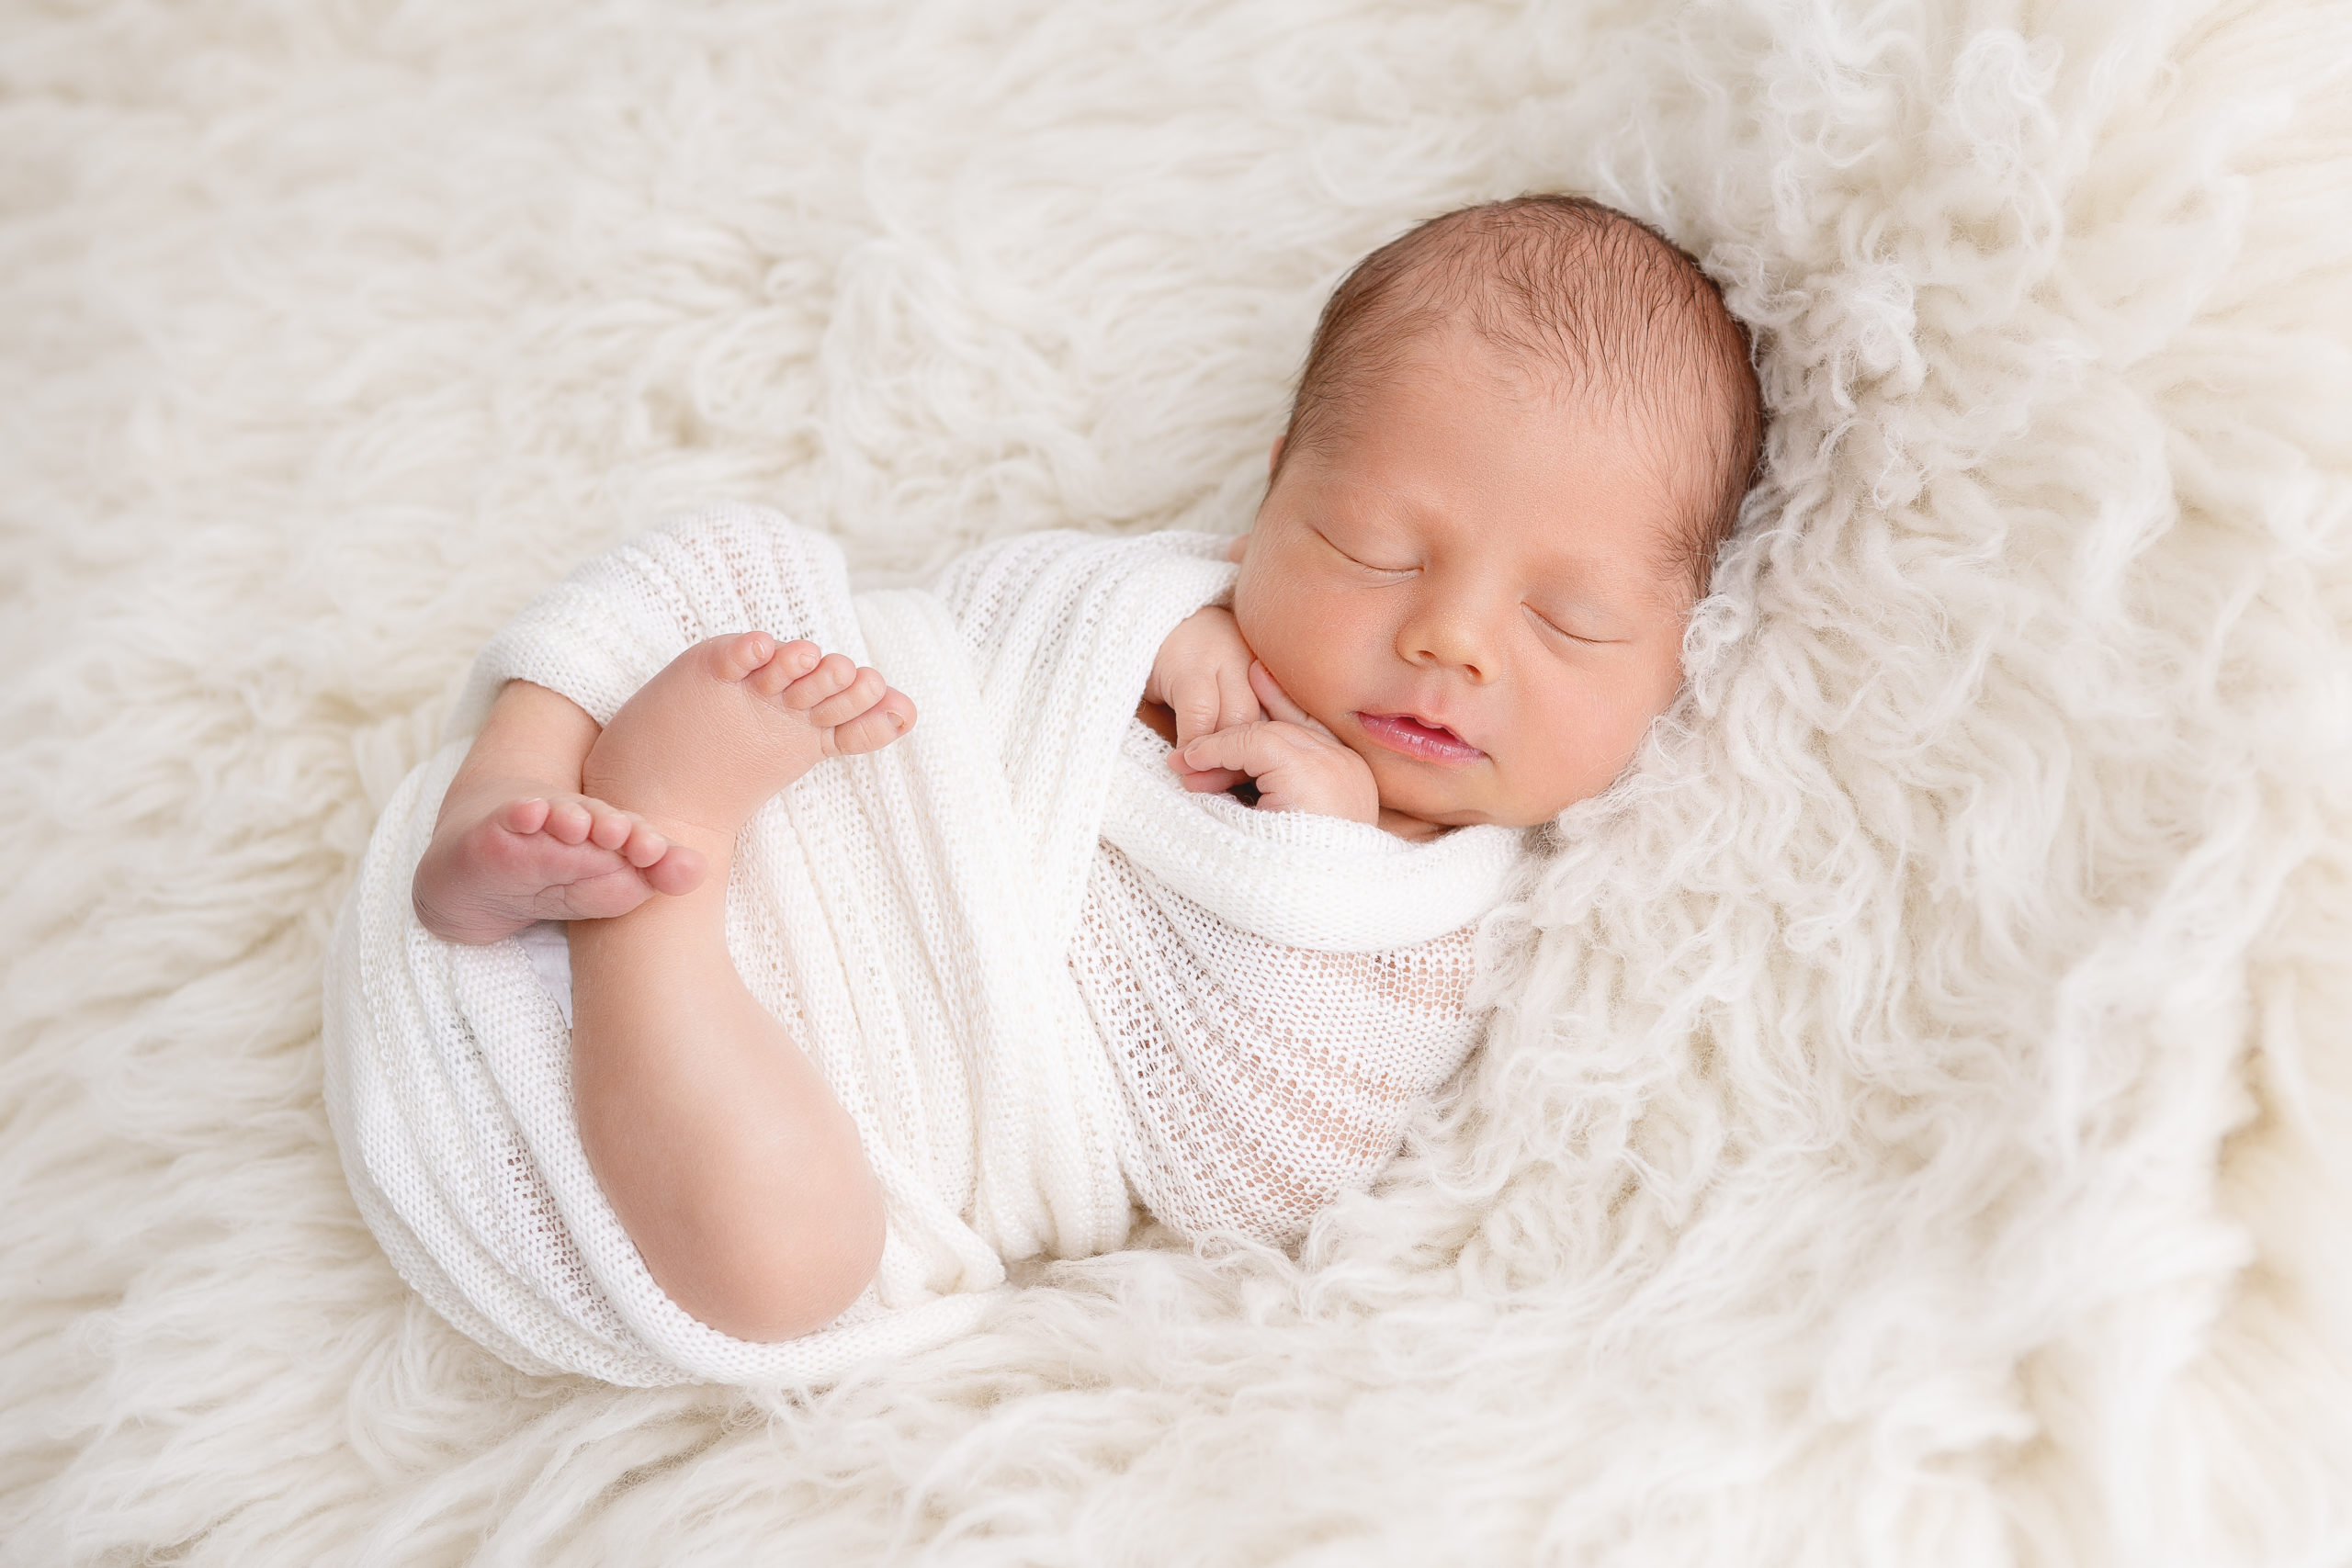 sleeping newborns are much easier to photograph